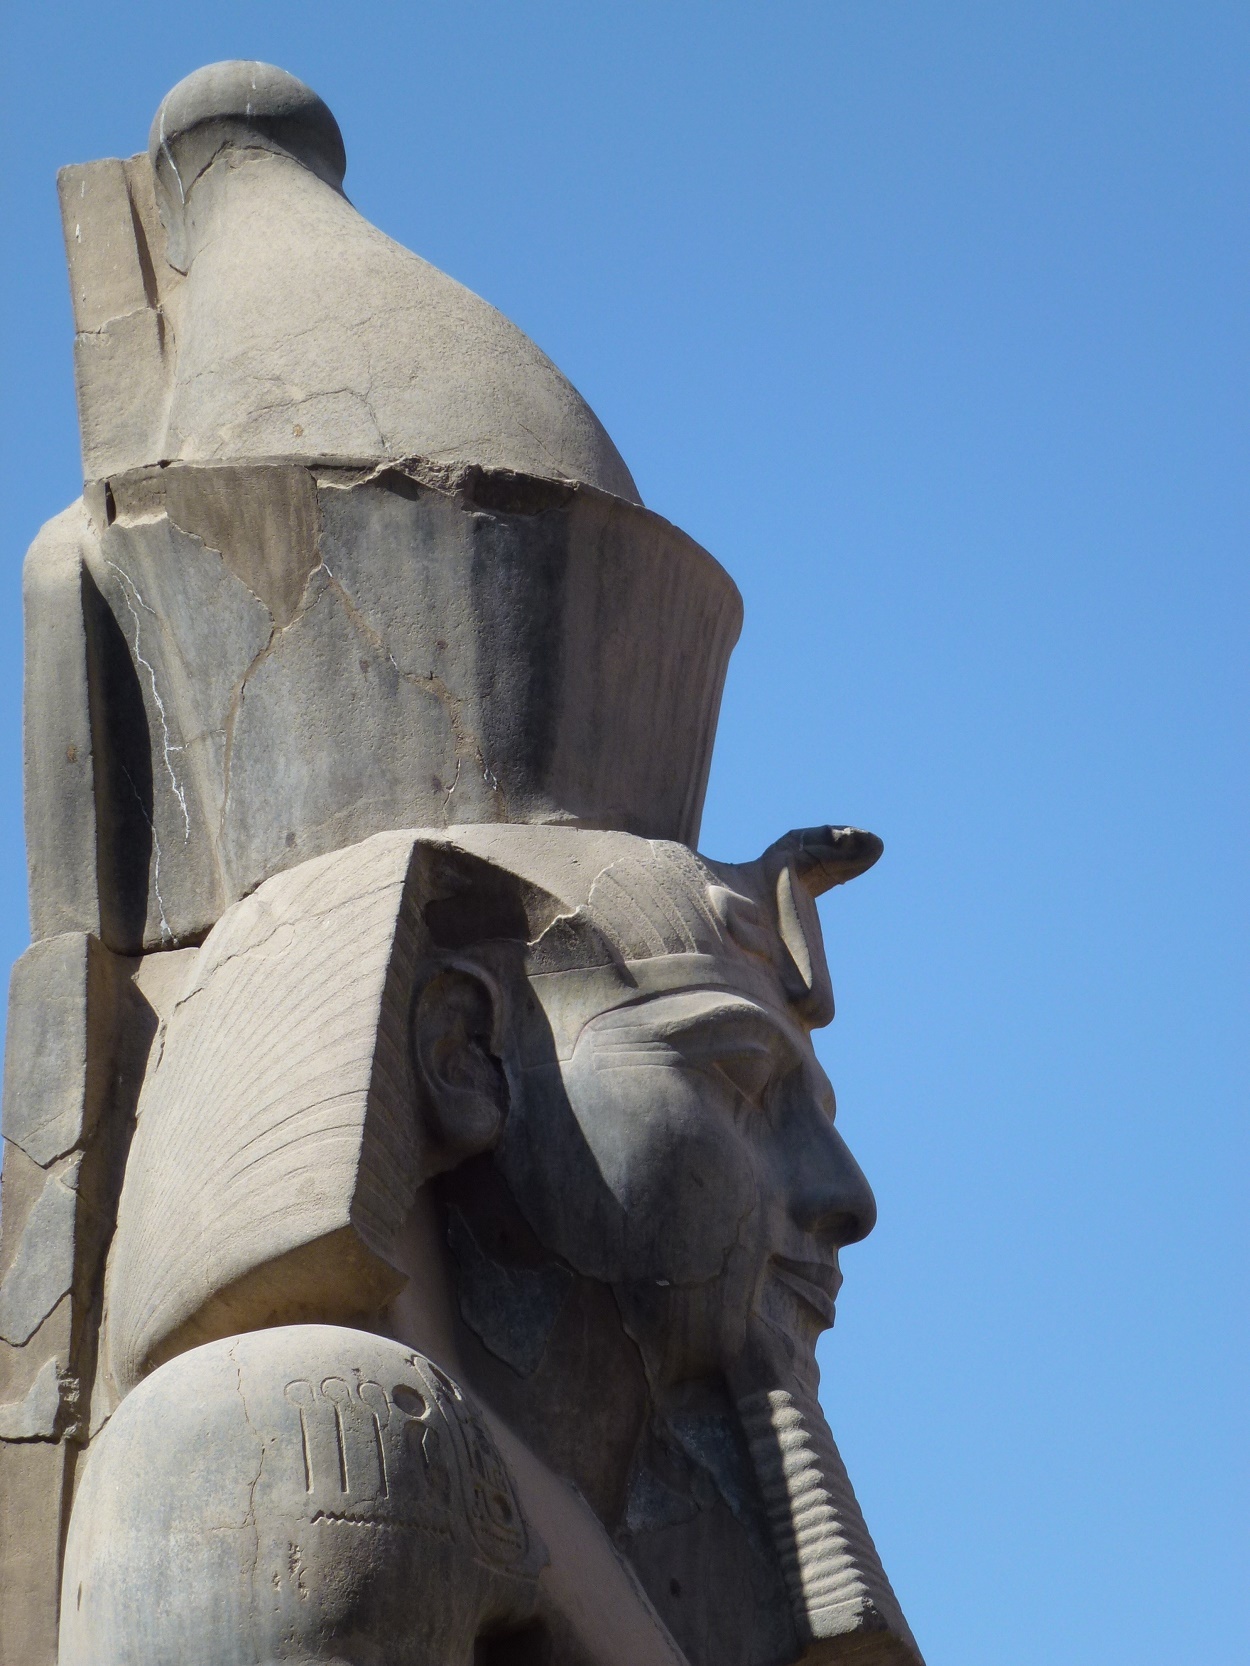 Aswan to Luxor: East Bank & West Bank - Temples & Tombs - overnight